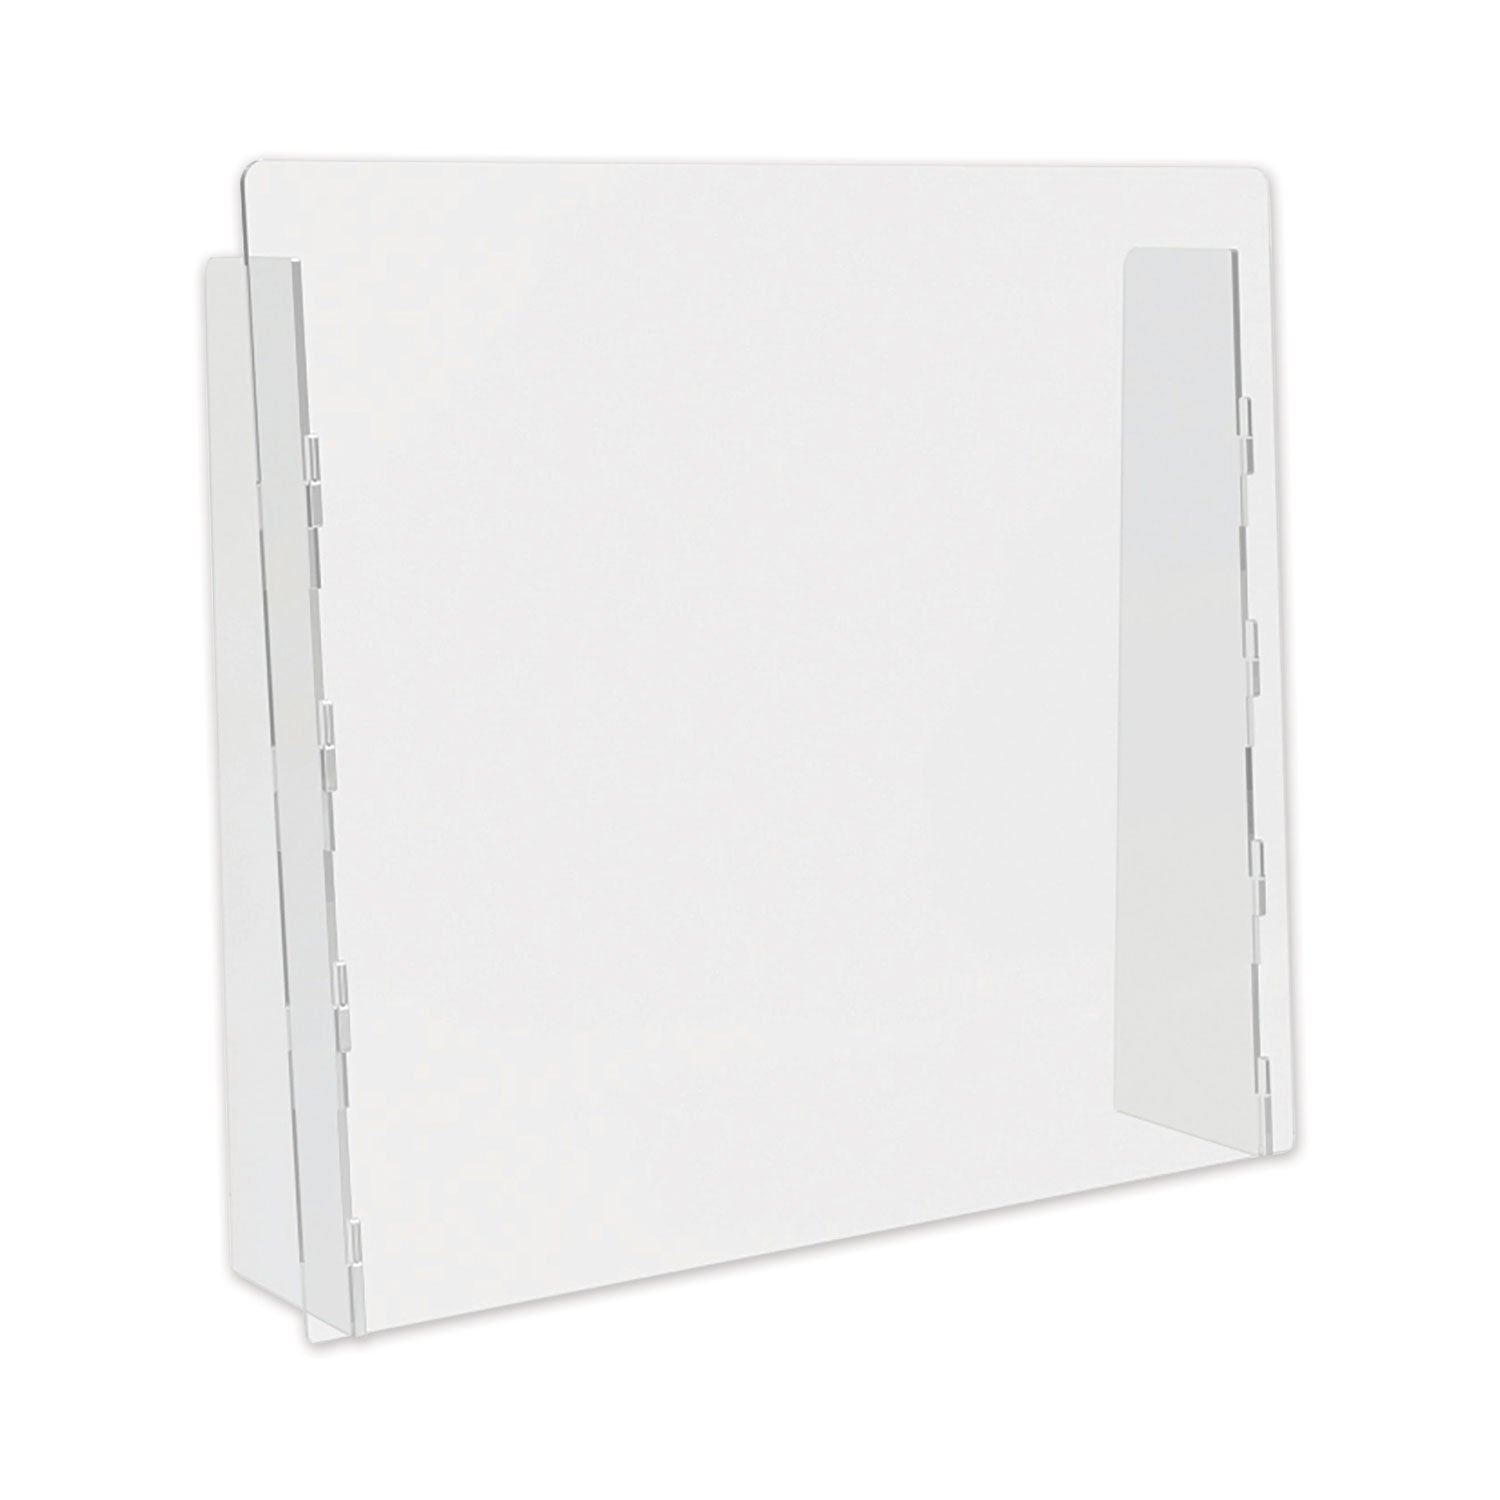 counter-top-barrier-with-full-shield-27-x-6-x-2375-polycarbonate-clear-2-carton_defpbctpc2724f - 1